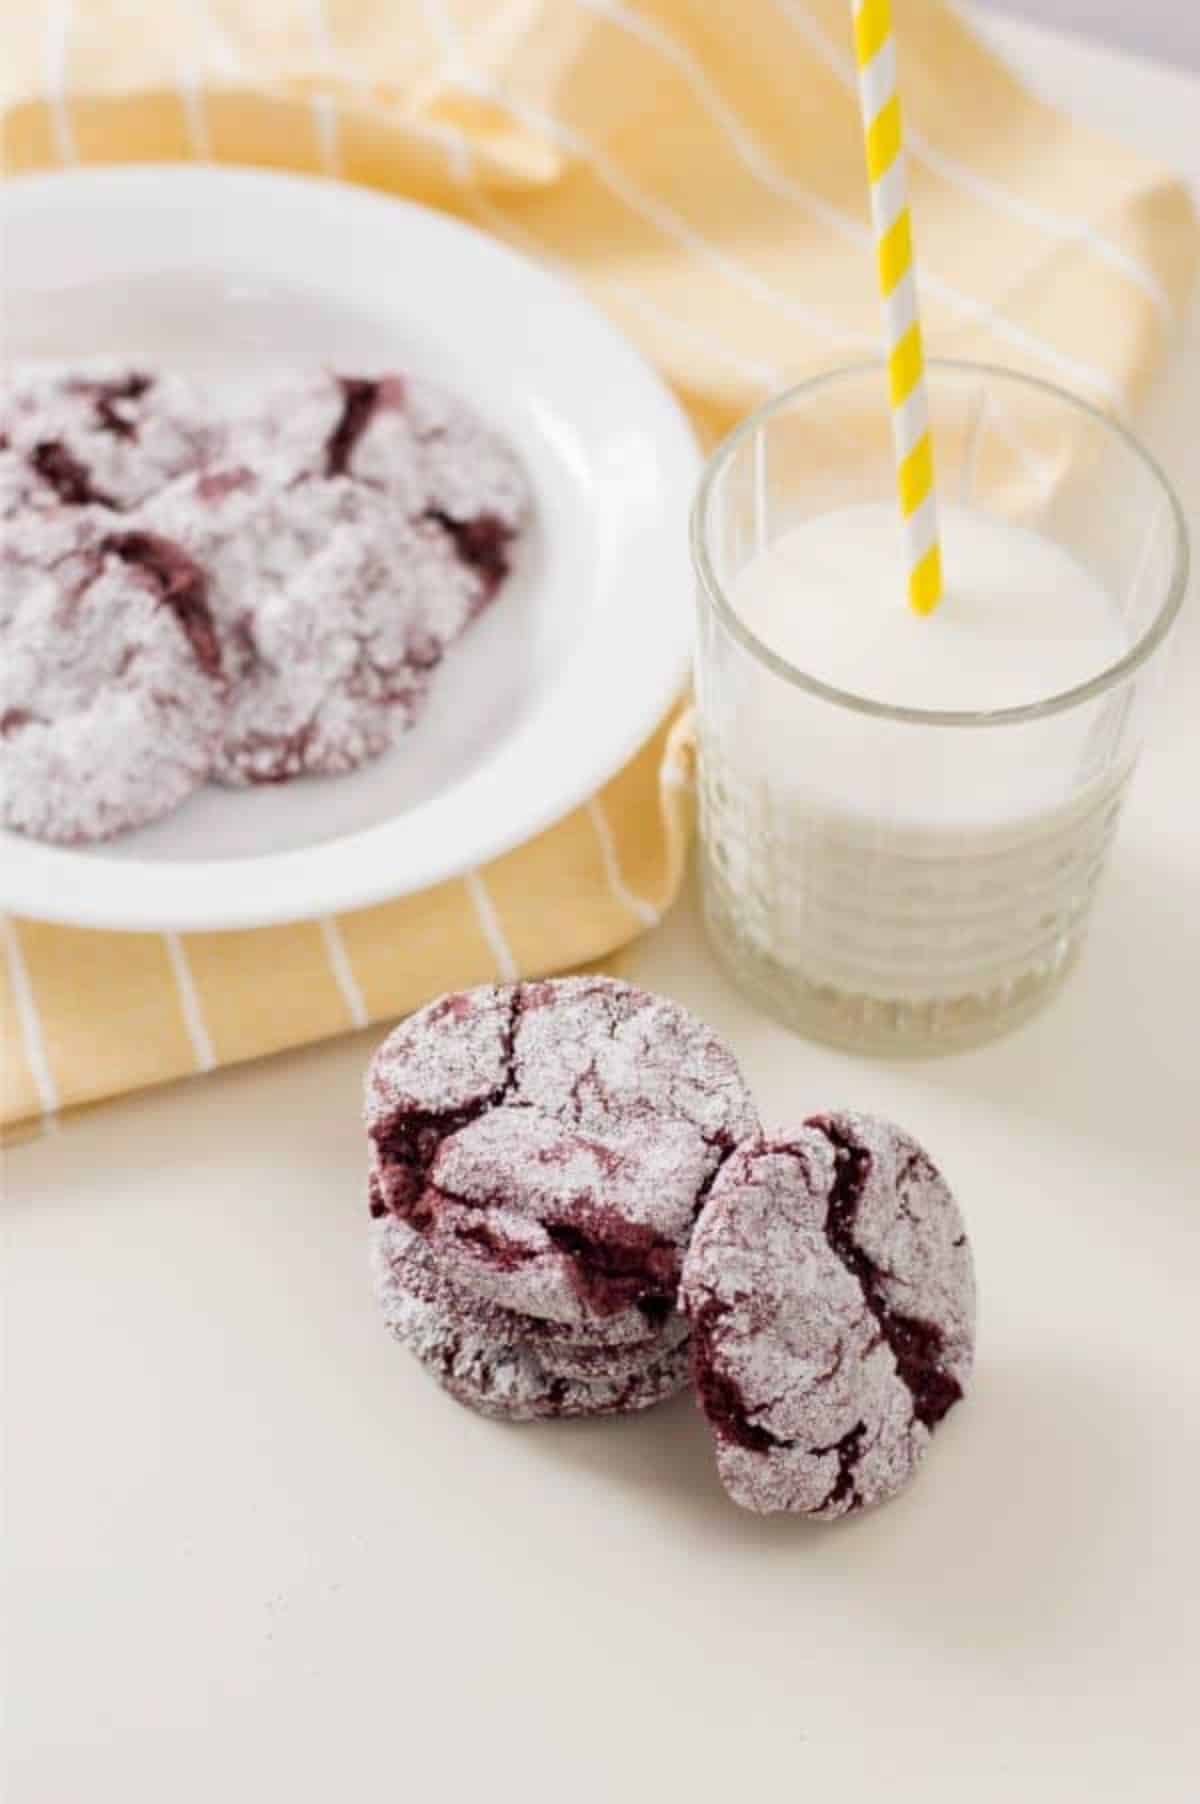 red velvet cookies stacked on a white table with more cookies on a white plate in the background on a yellow cloth next to a glass of milk.